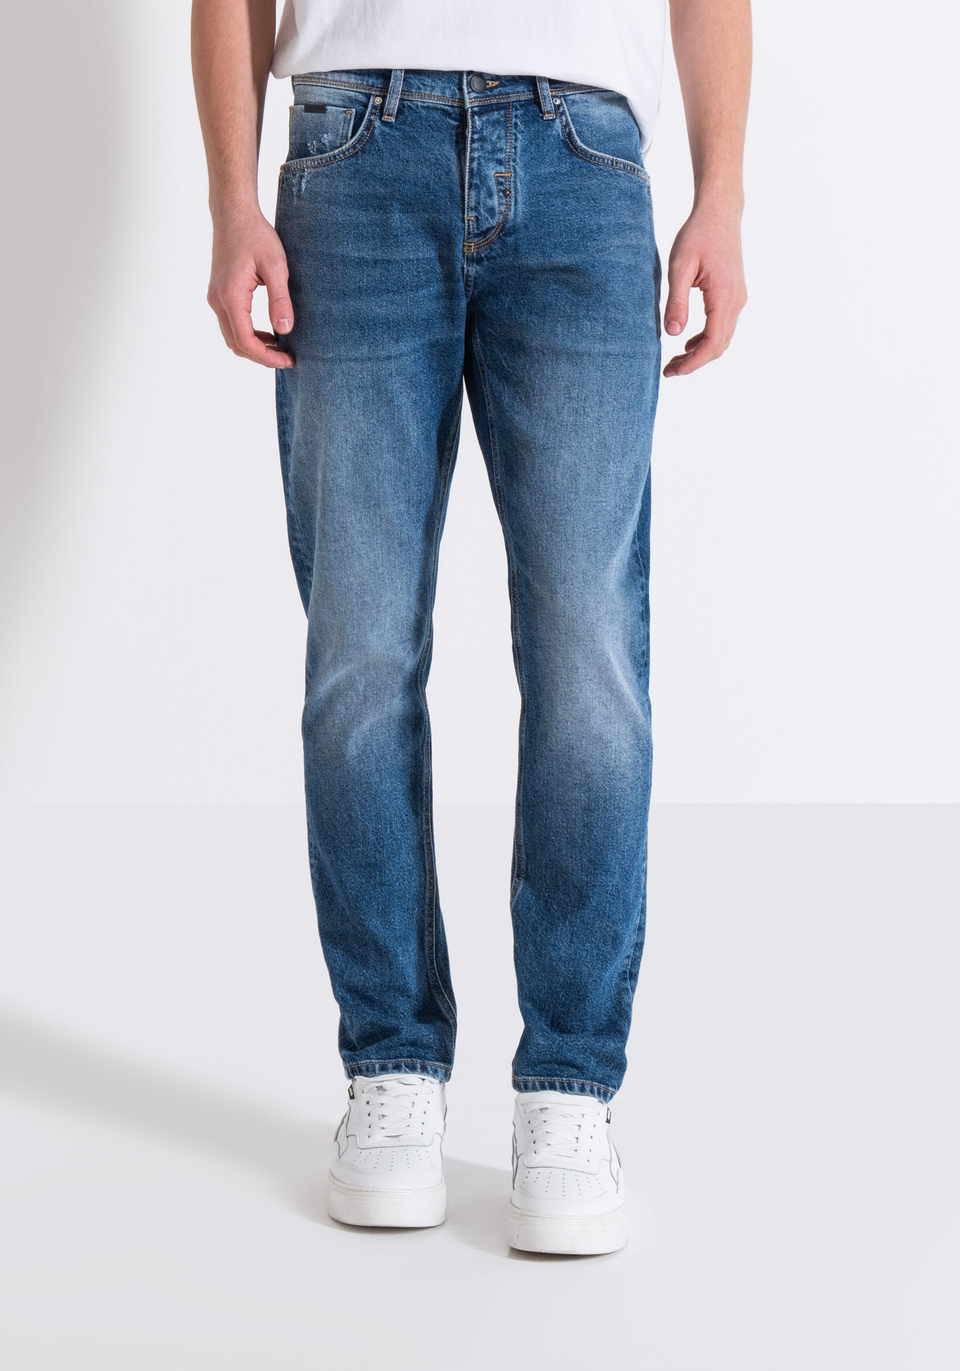 SLIM FIT "LAURENT" JEANS IN COMFORT DENIM WITH TOBACCO COLORED STITCHING - Antony Morato Online Shop